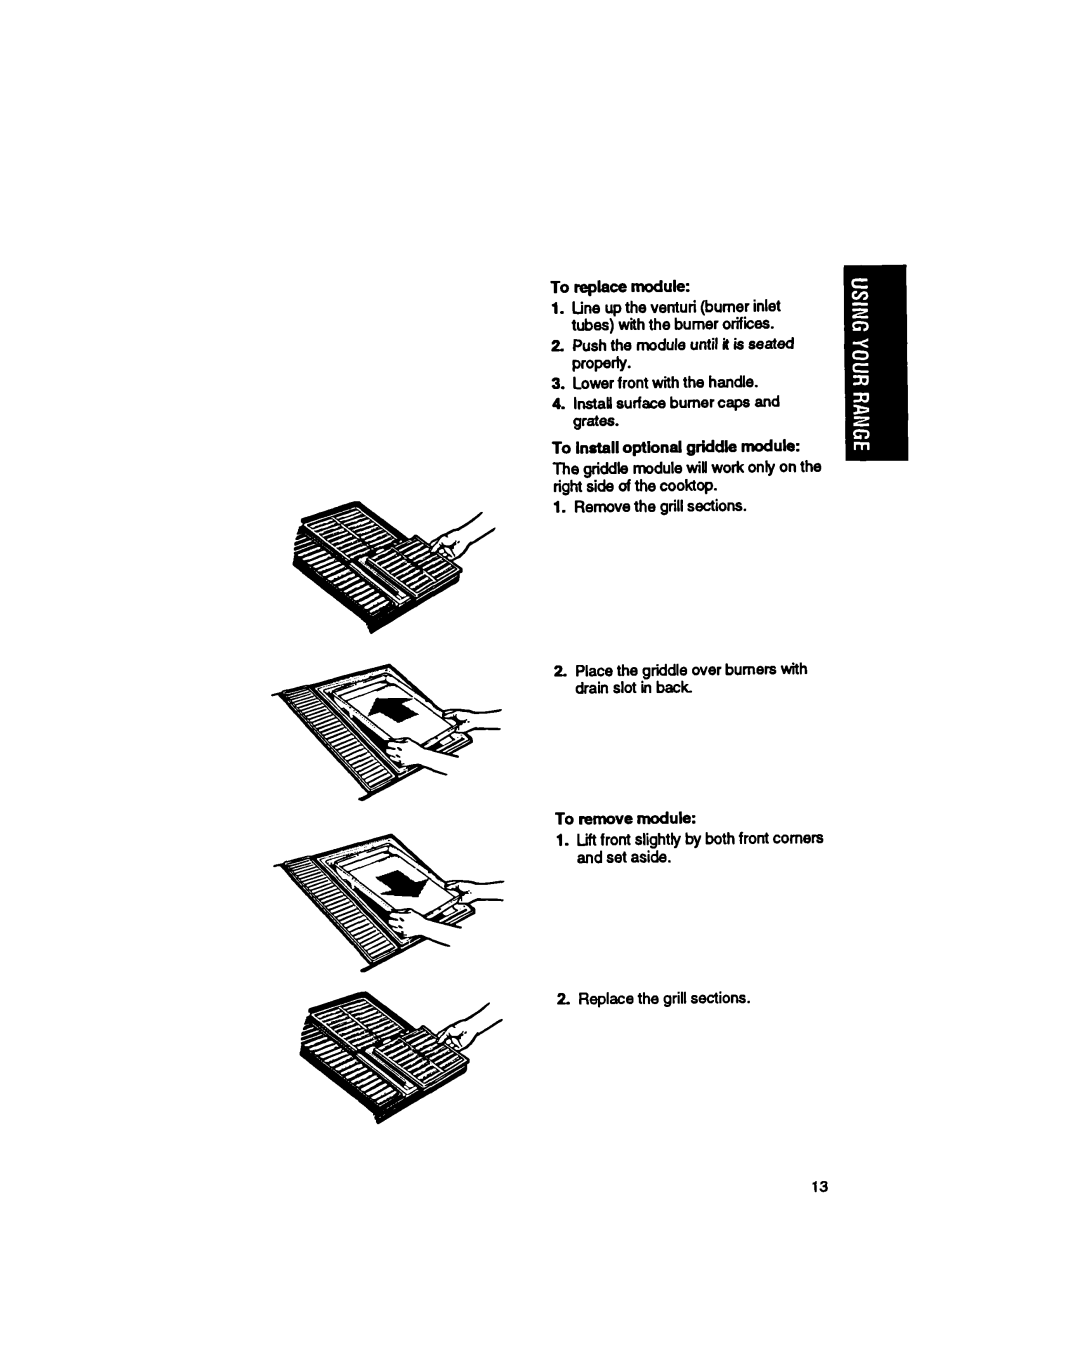 Whirlpool SS373PEX manual To replace module, To Install optlonal griddle module, To remove module 